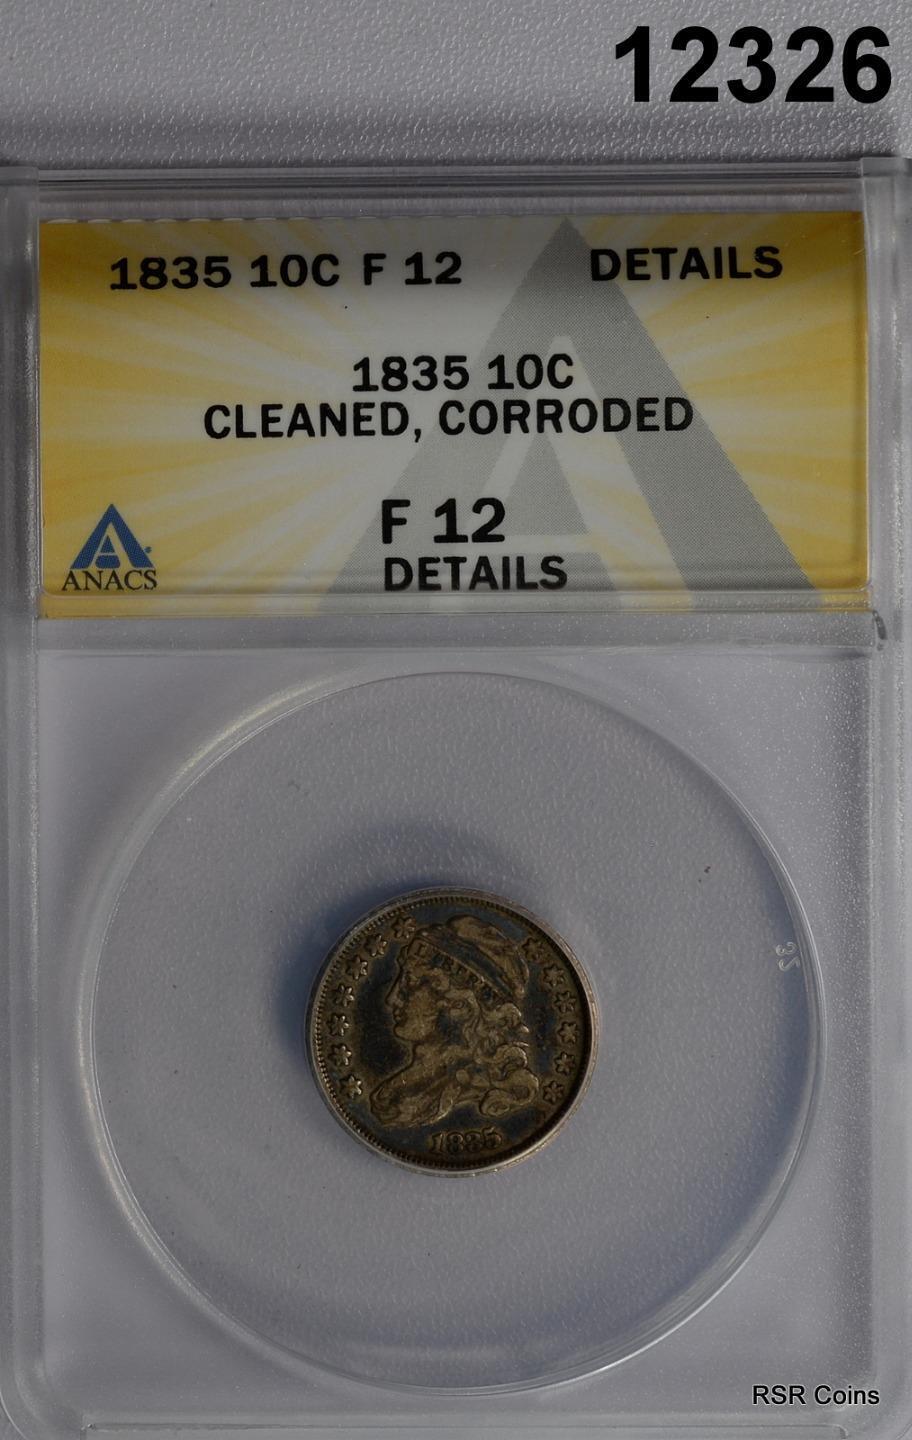 1835 CAPPED BUST DIME ANACS CERTIFIED F12 CLEANED CORRODED #12326